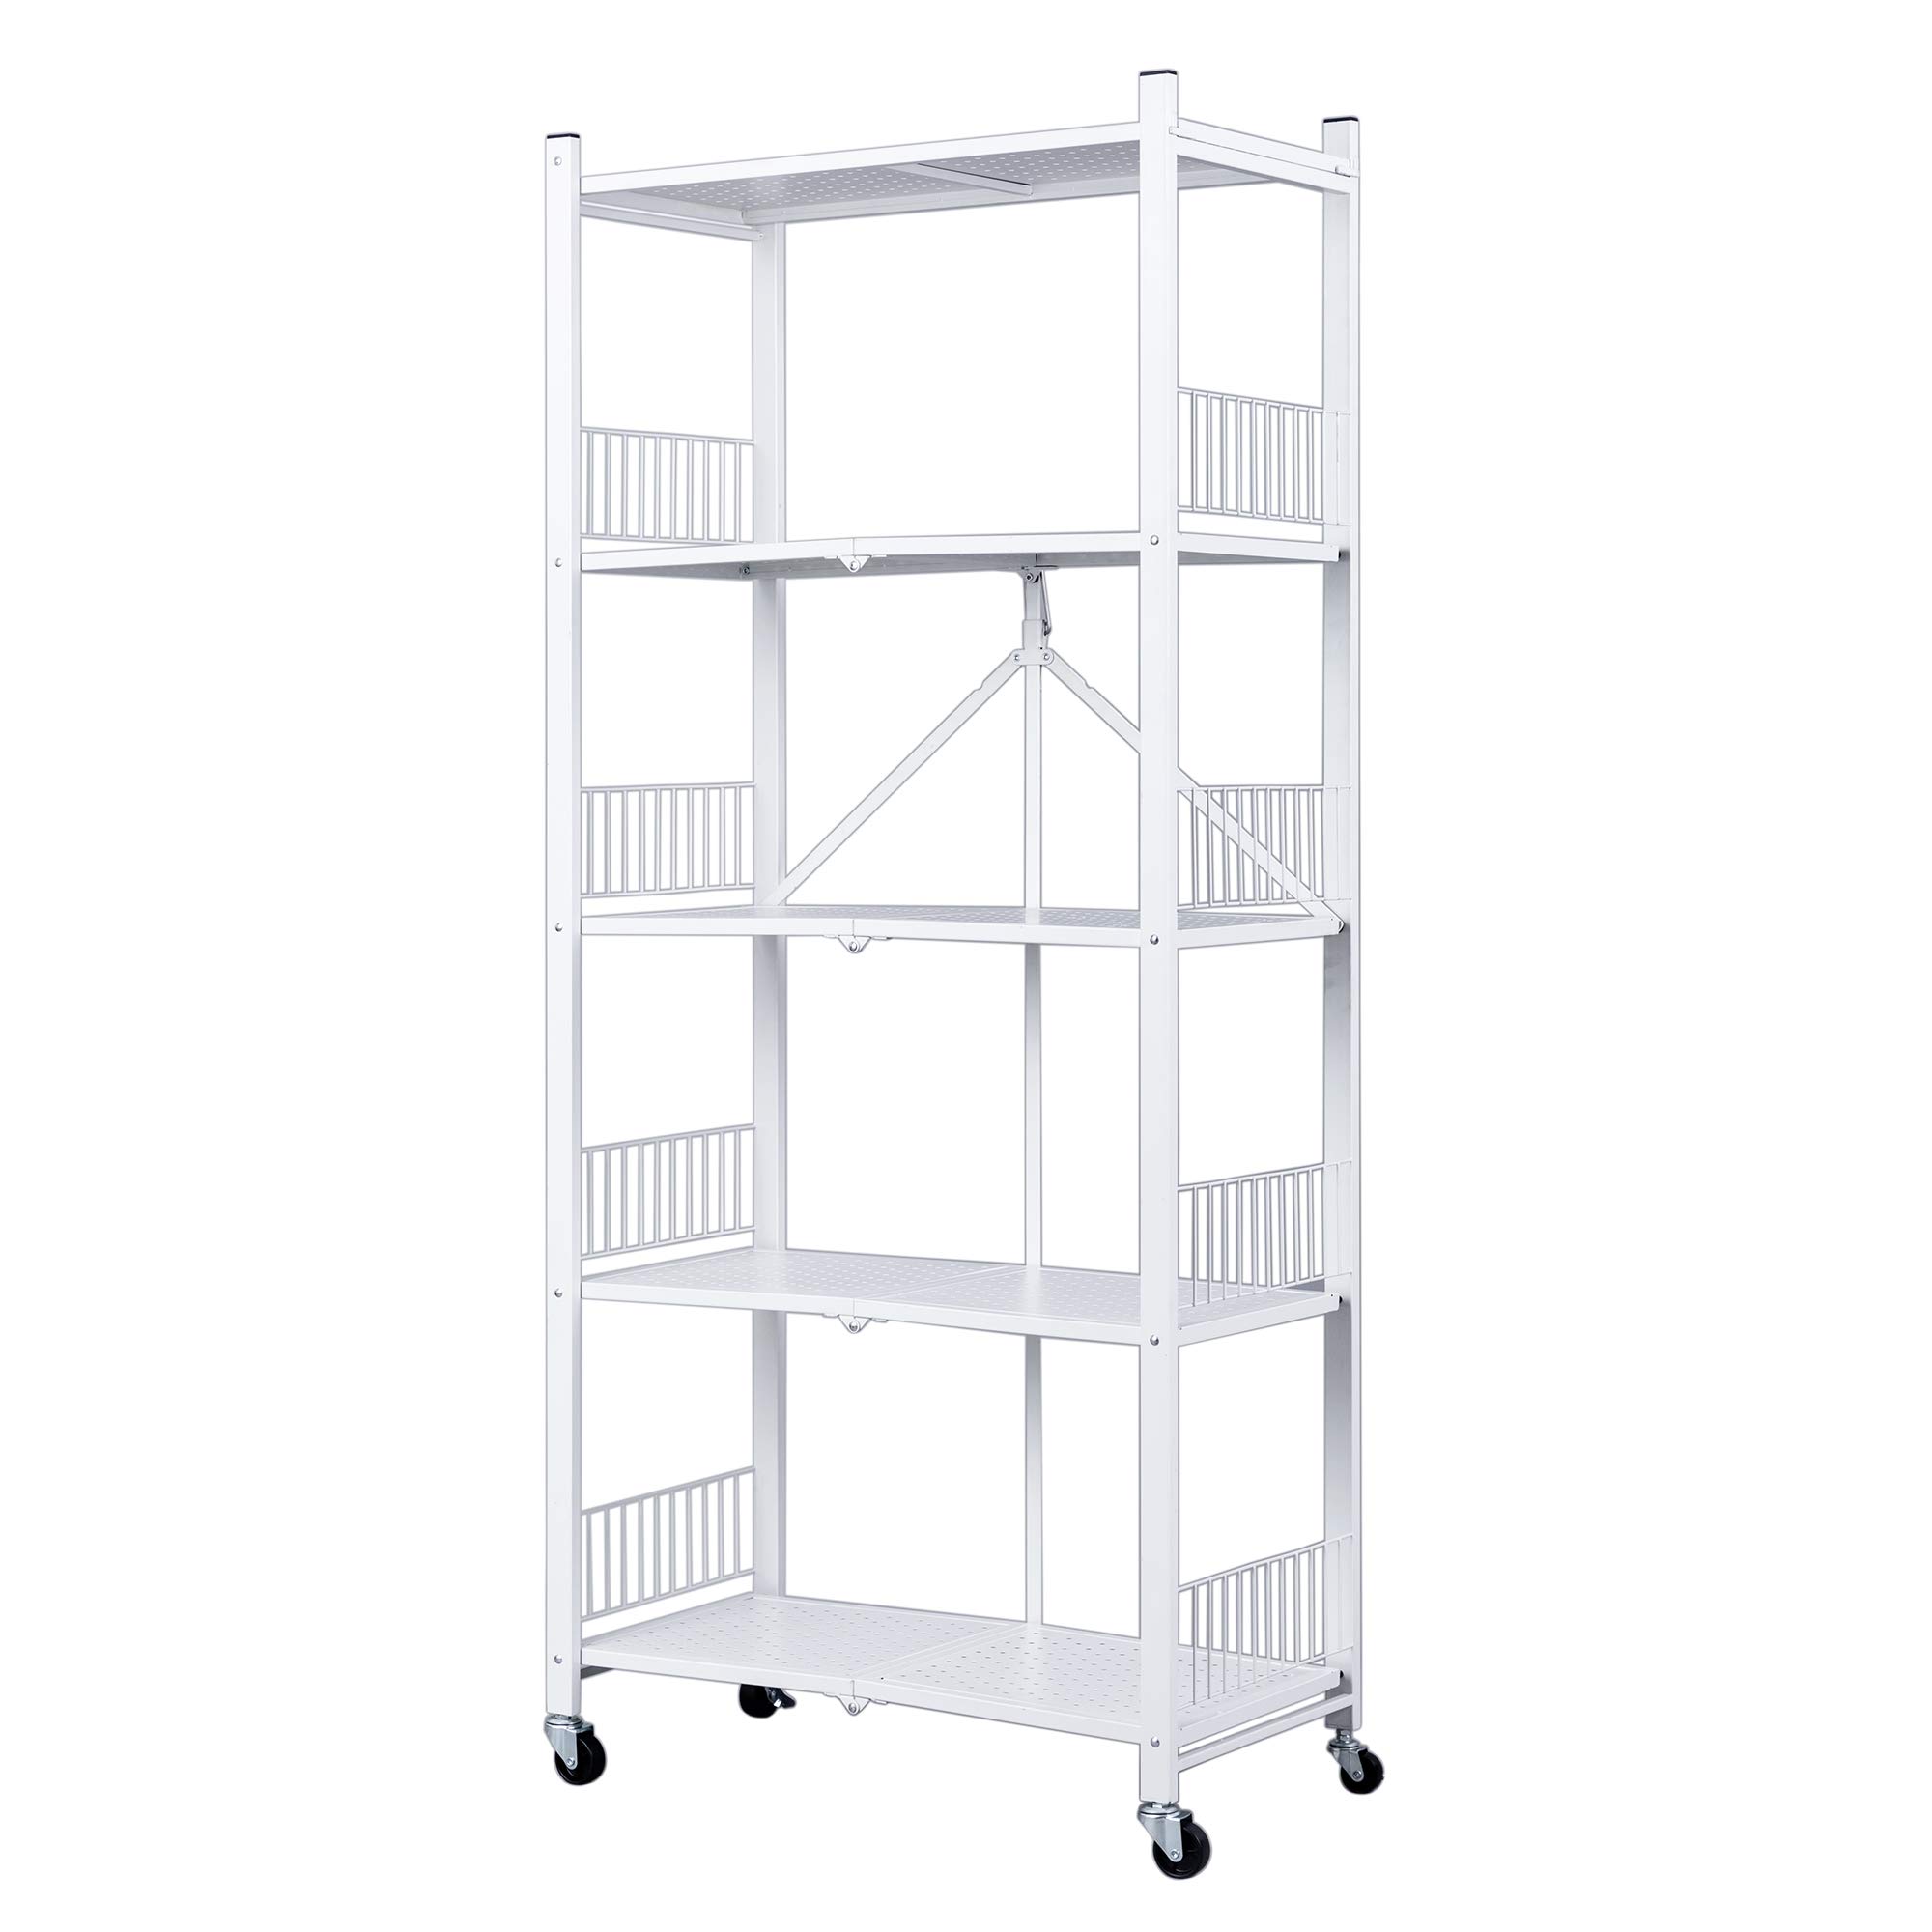 Jaq Foldable Storage Shelves Unit, 5-Tier Folding Shelf Shelving Rack Organizer cart with Rolling Wheels for Temporary or Mobile Sto